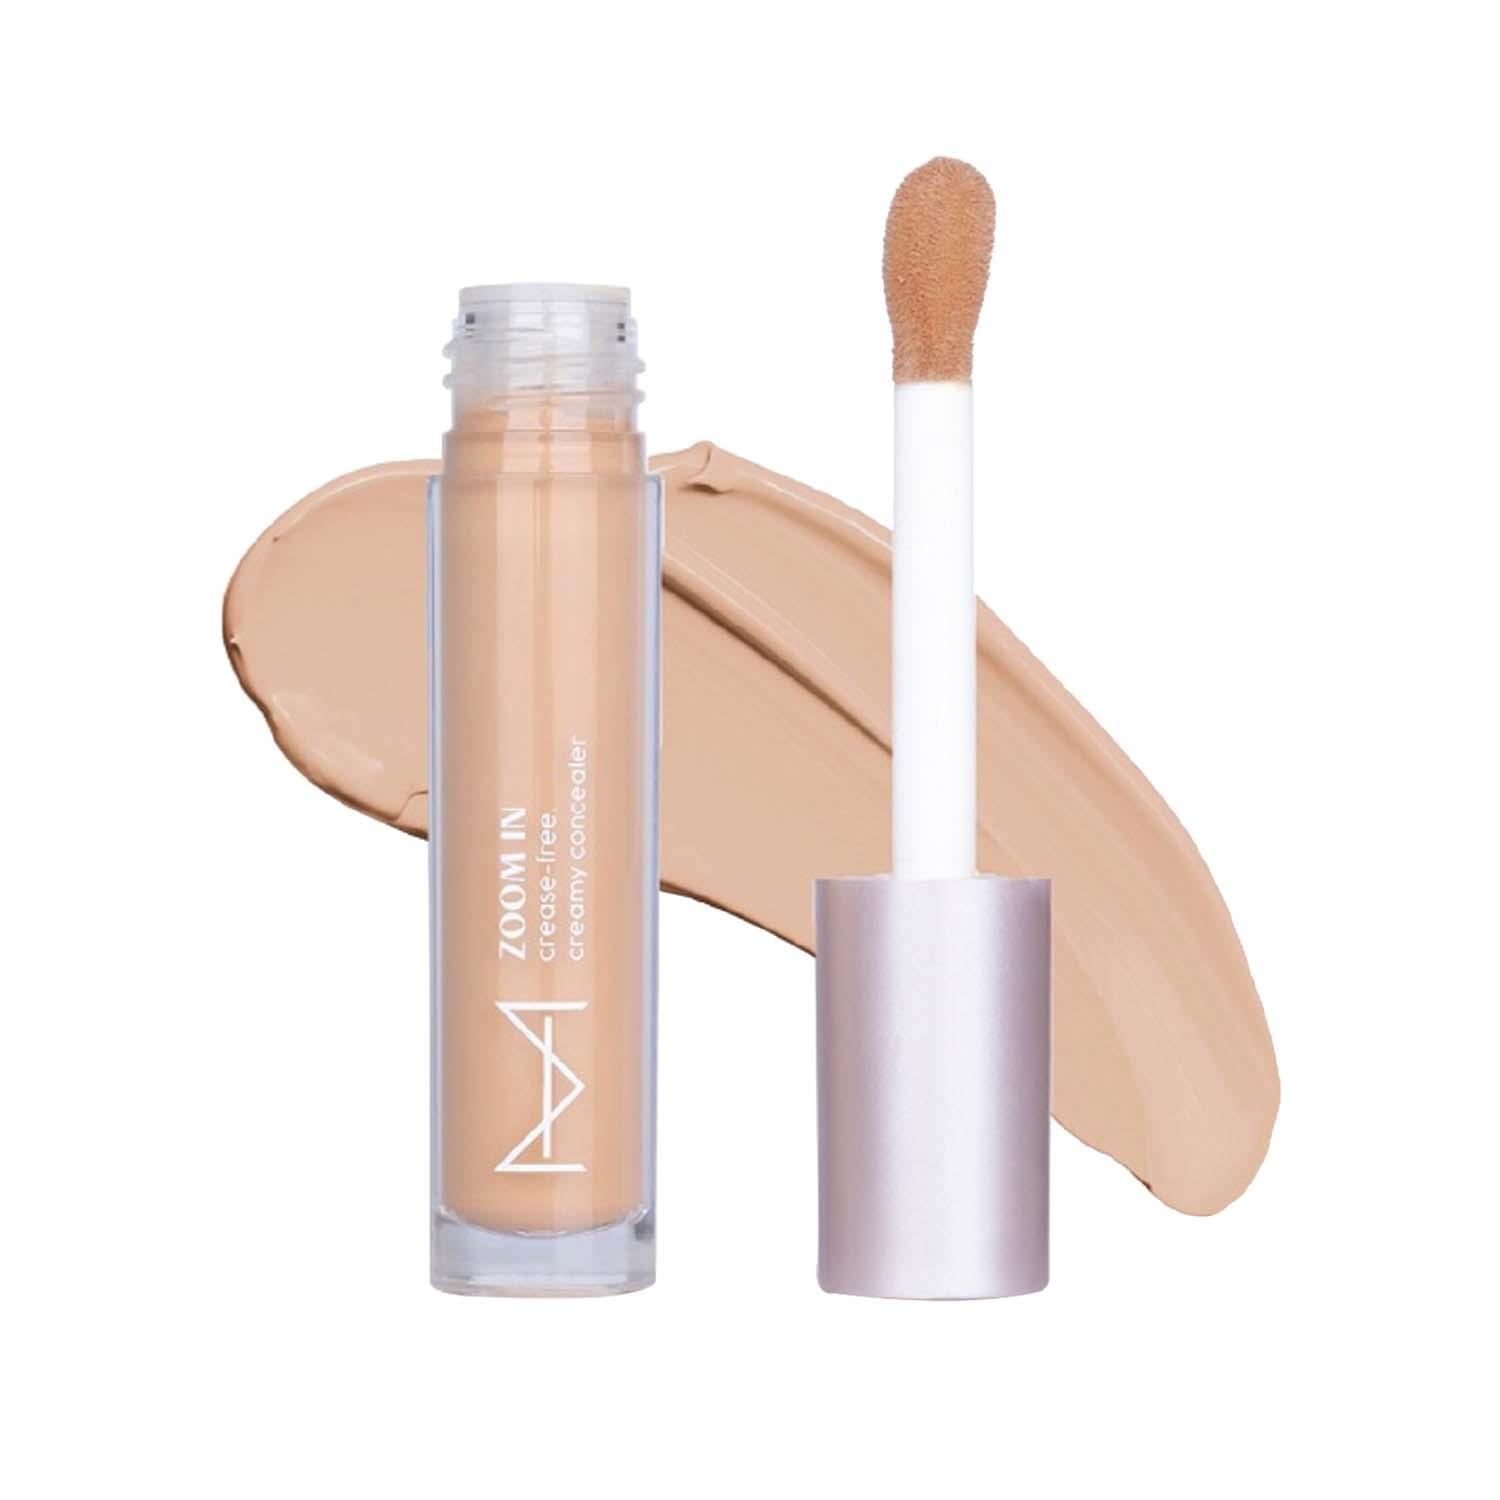 HOUSE OF MAKEUP | HOUSE OF MAKEUP Zoom In Crease-Free, Creamy Concealer - D01 Deep Skin Tone (6 ml)